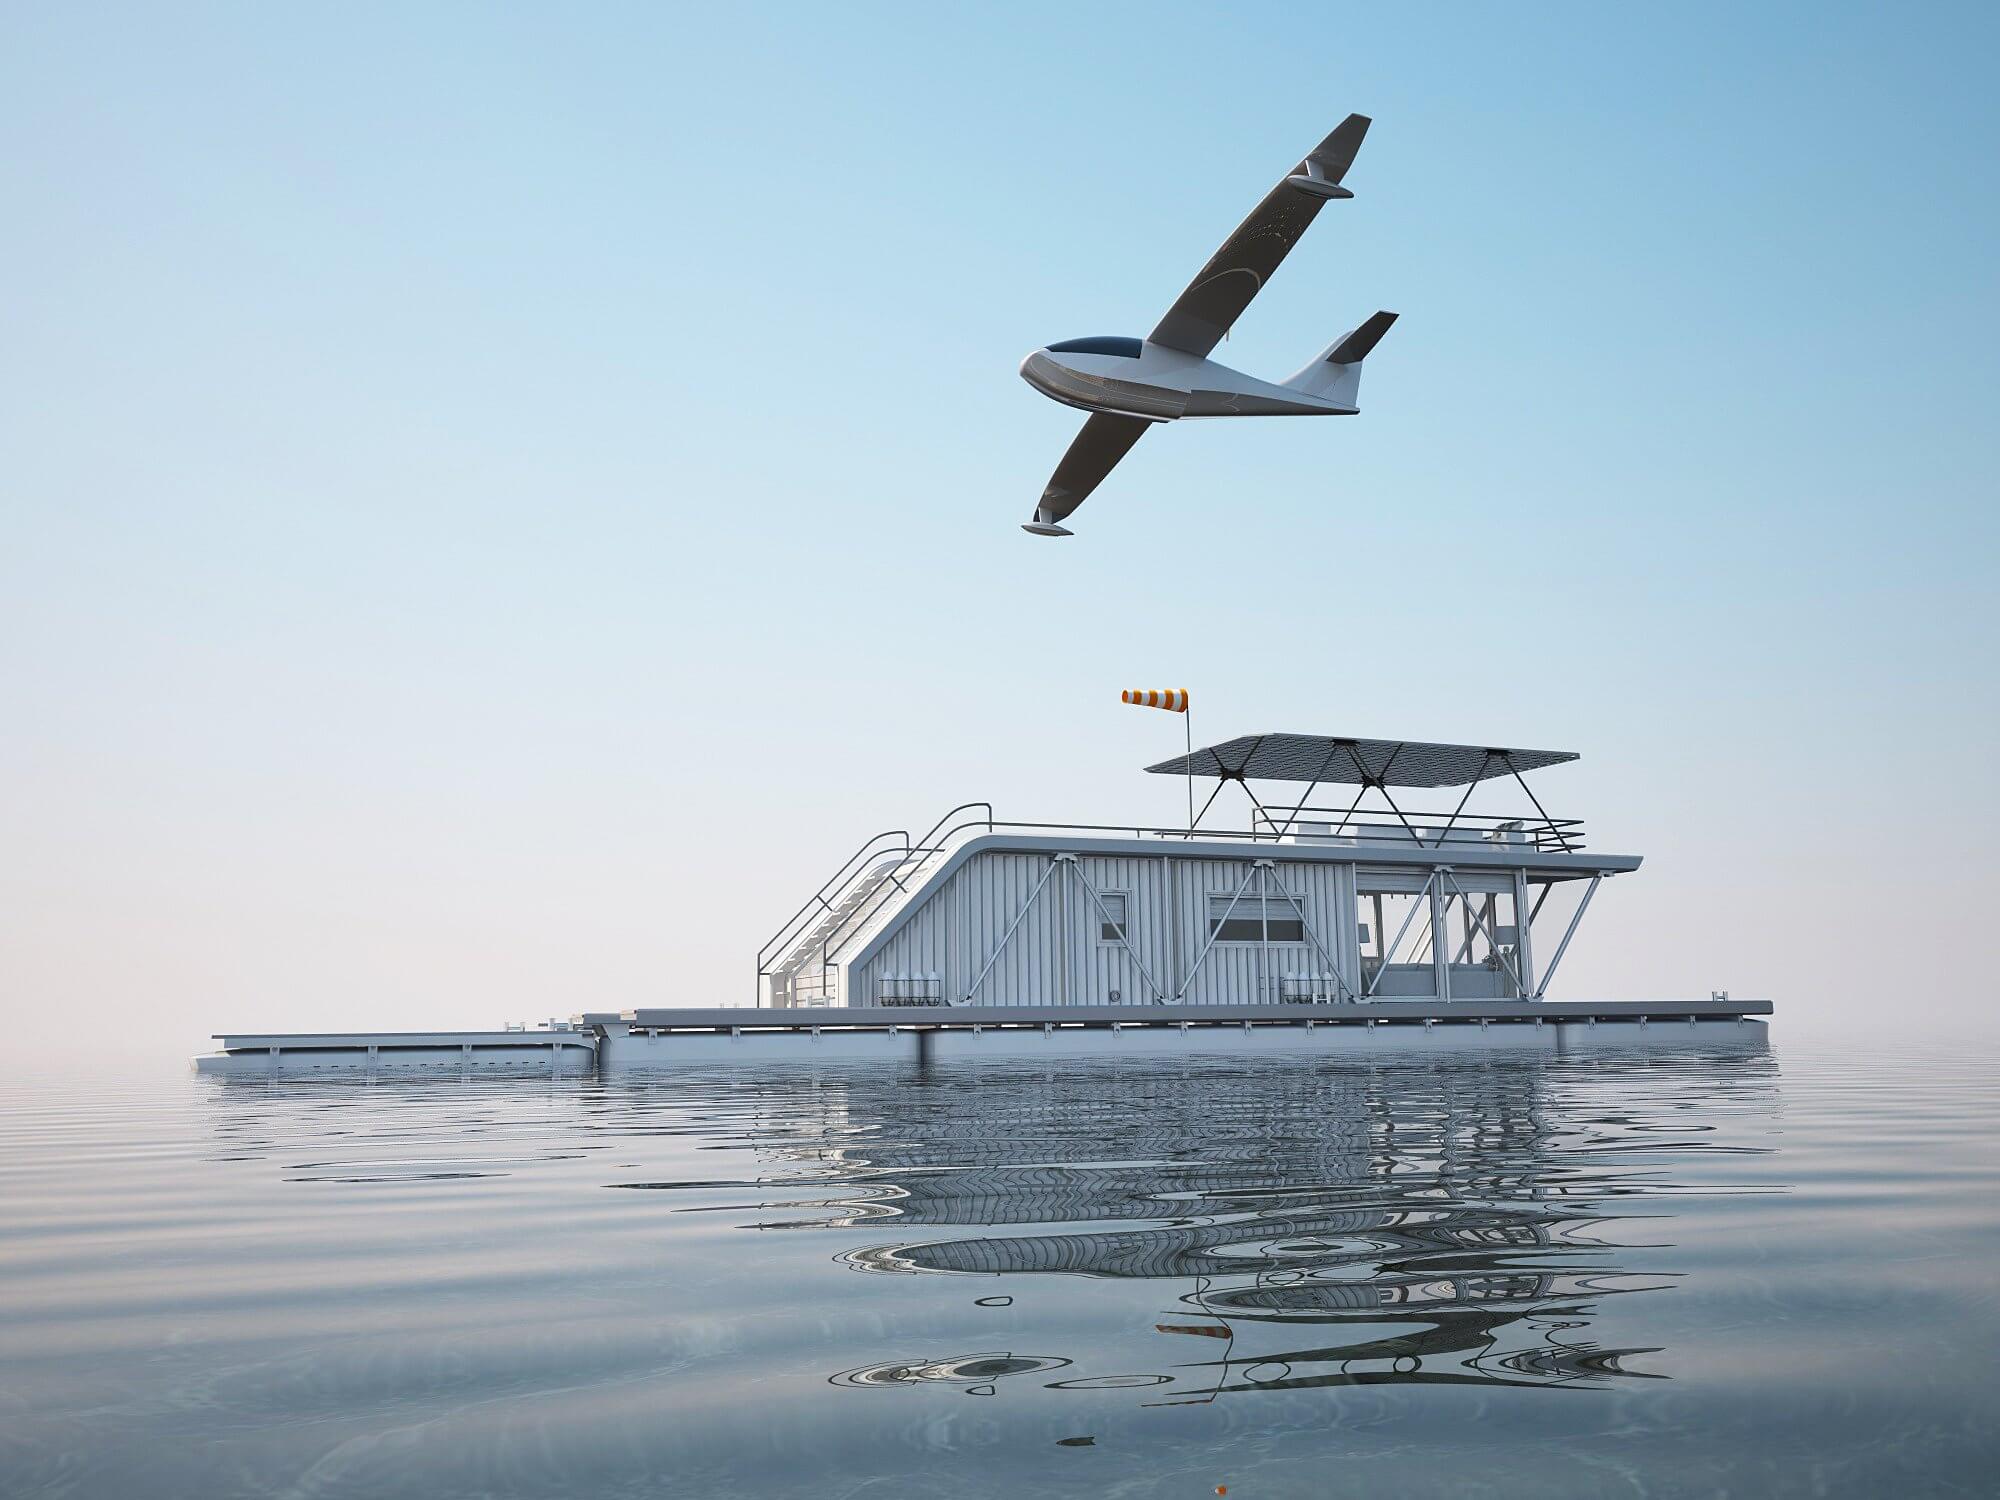 The sky is the limit with this houseboat aquaplane combination